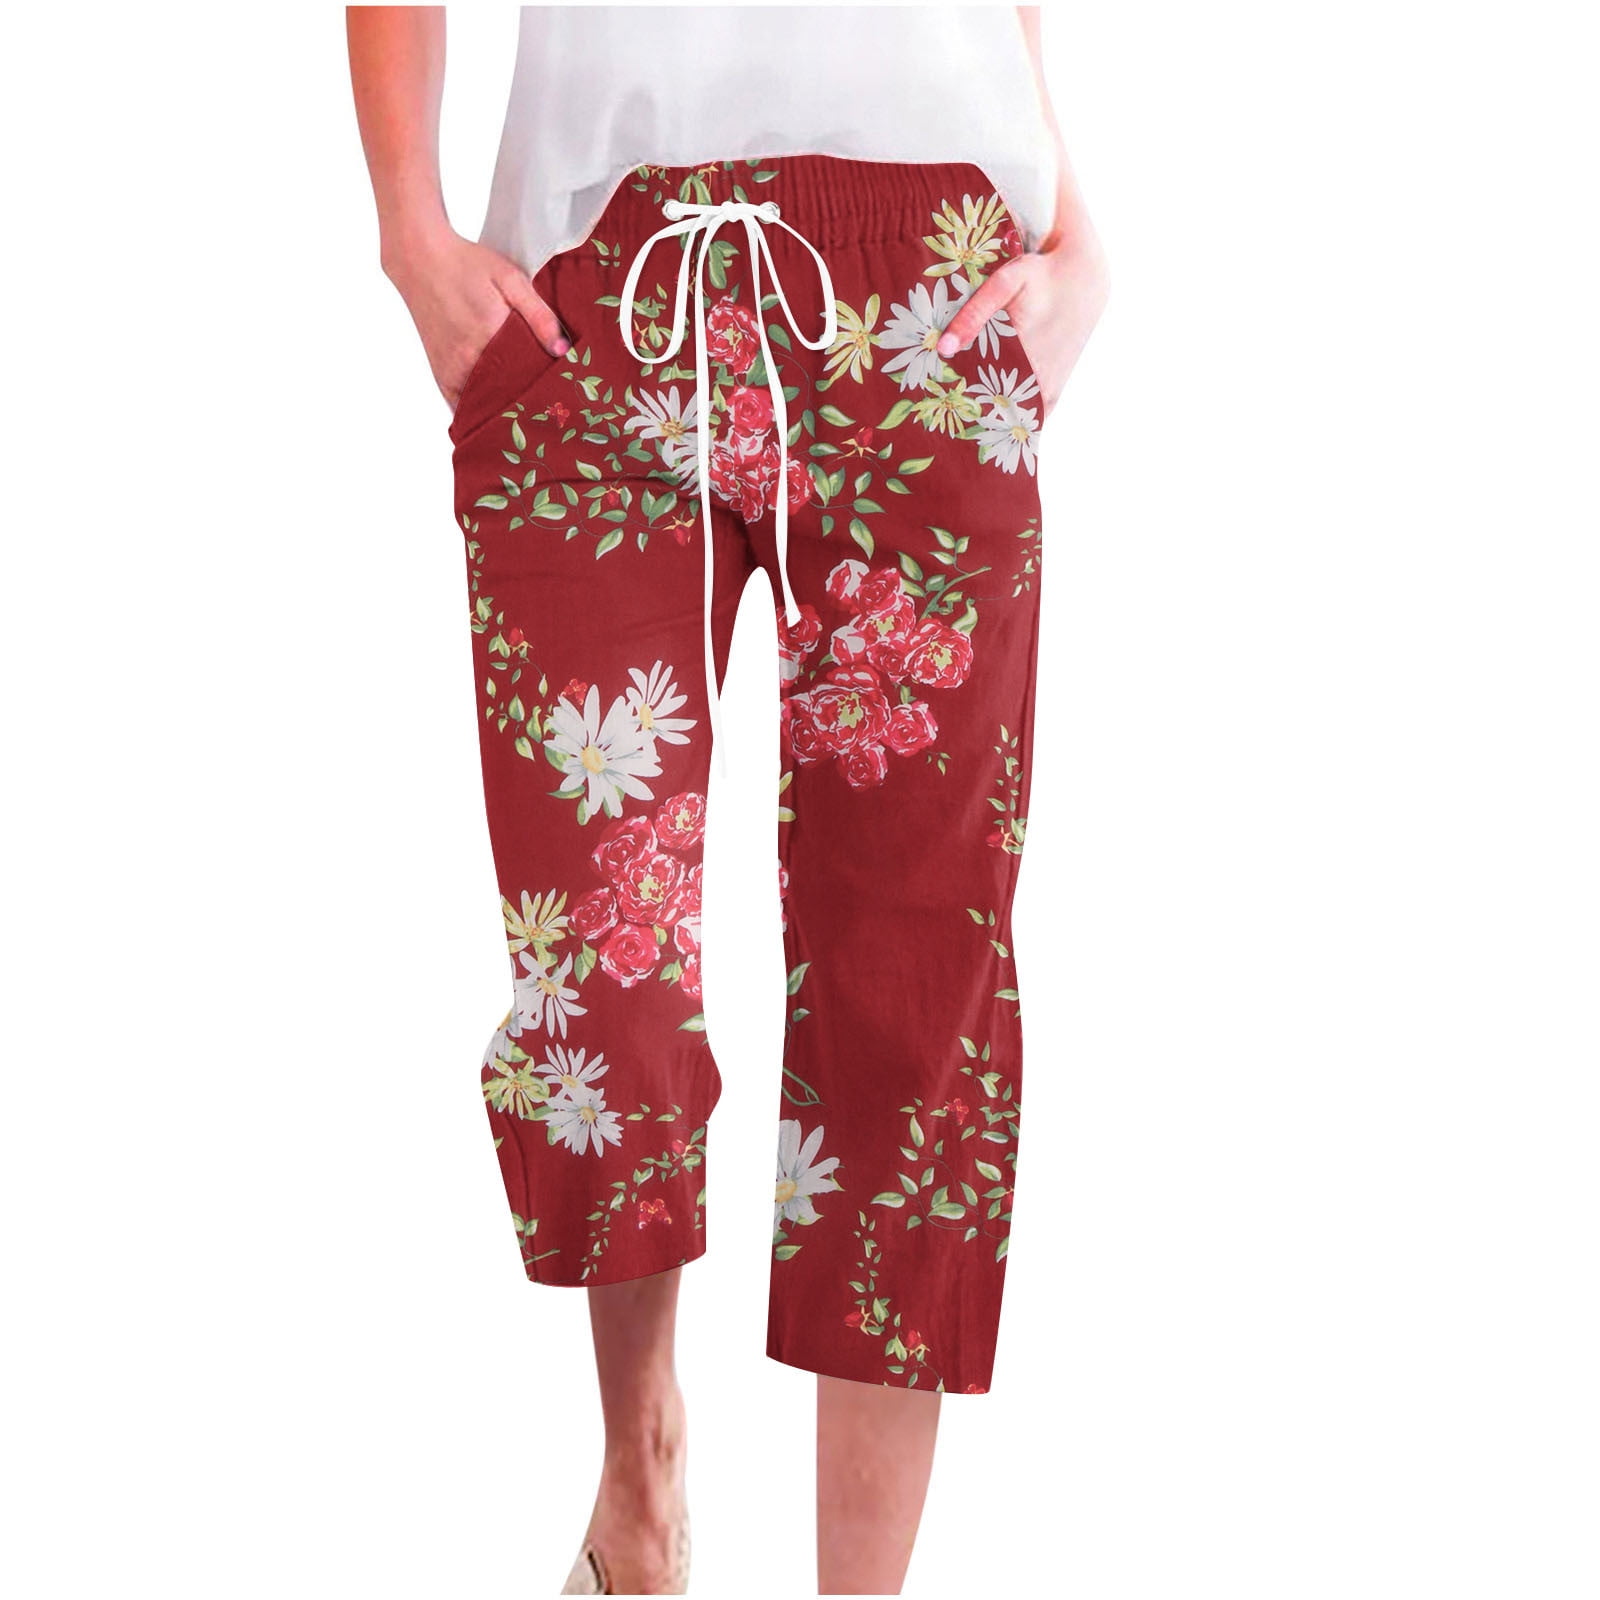 up to 60% off Gifts Usmixi Womens Floral Capri Pants Summer Comfy